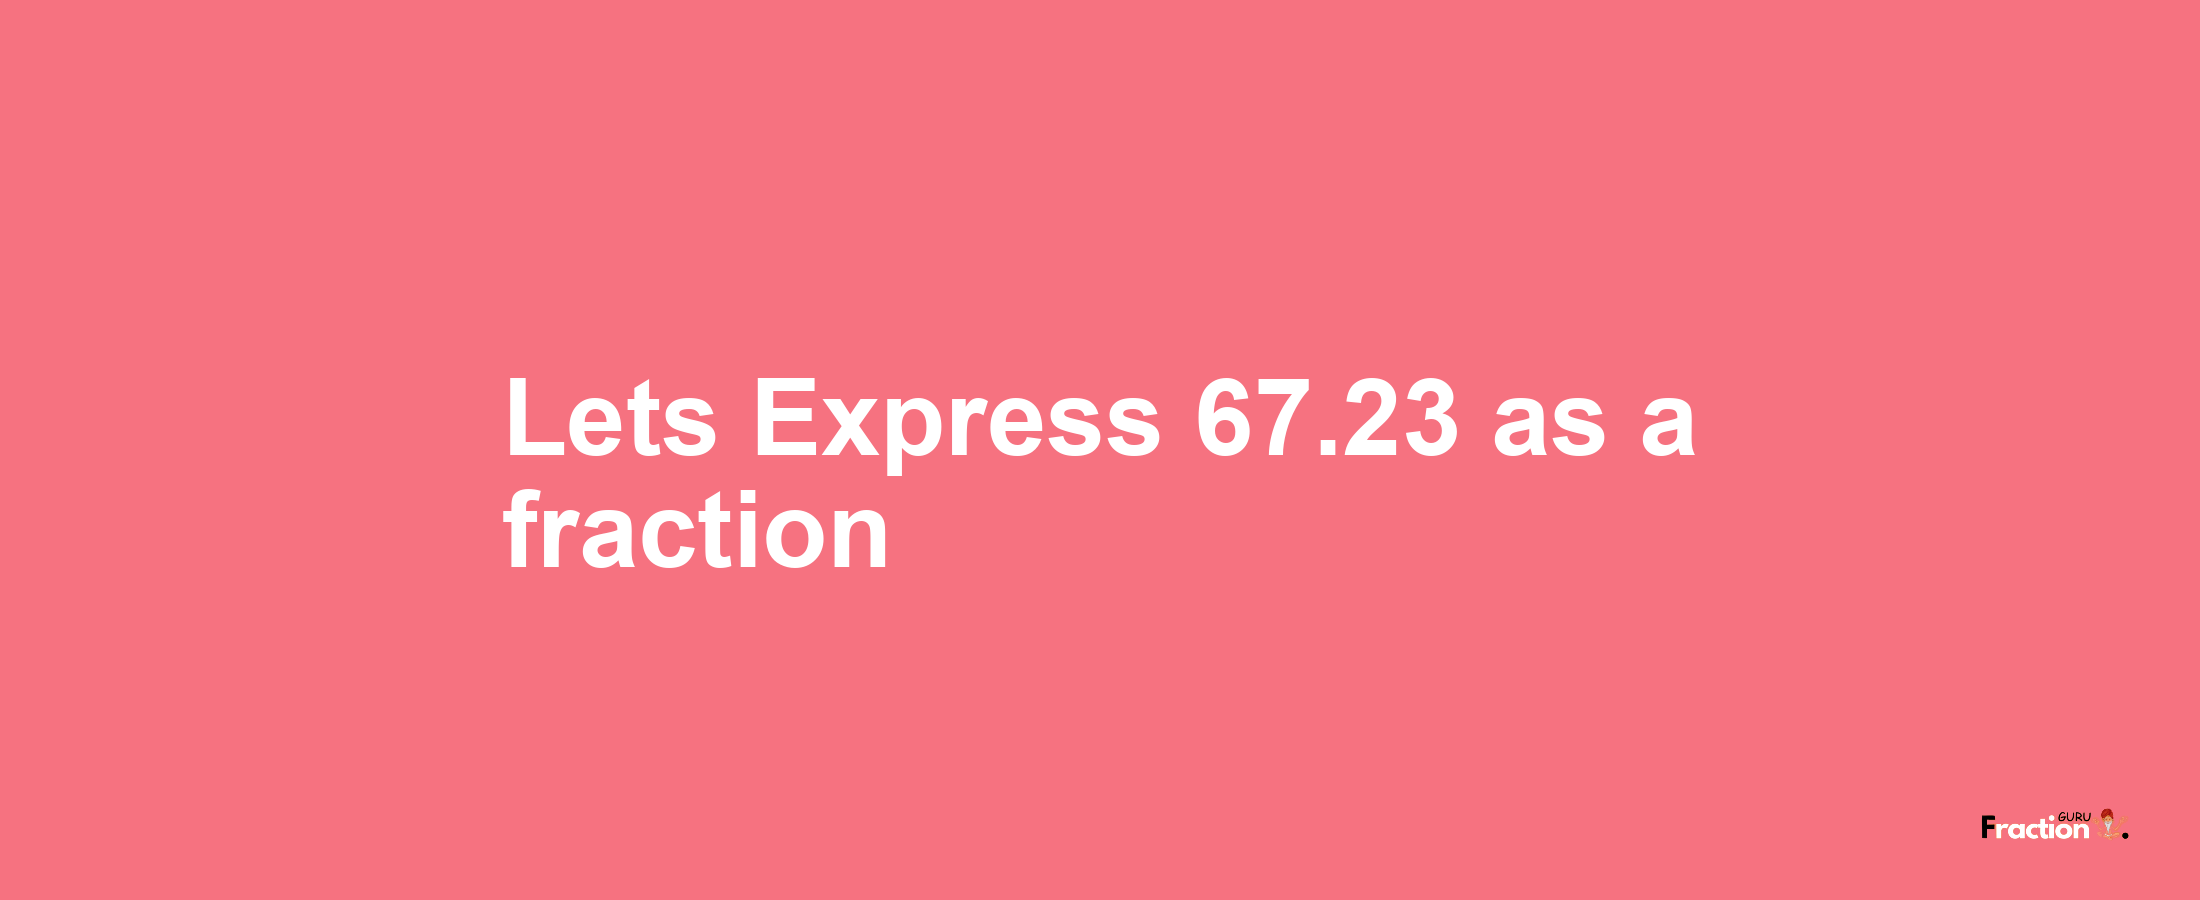 Lets Express 67.23 as afraction